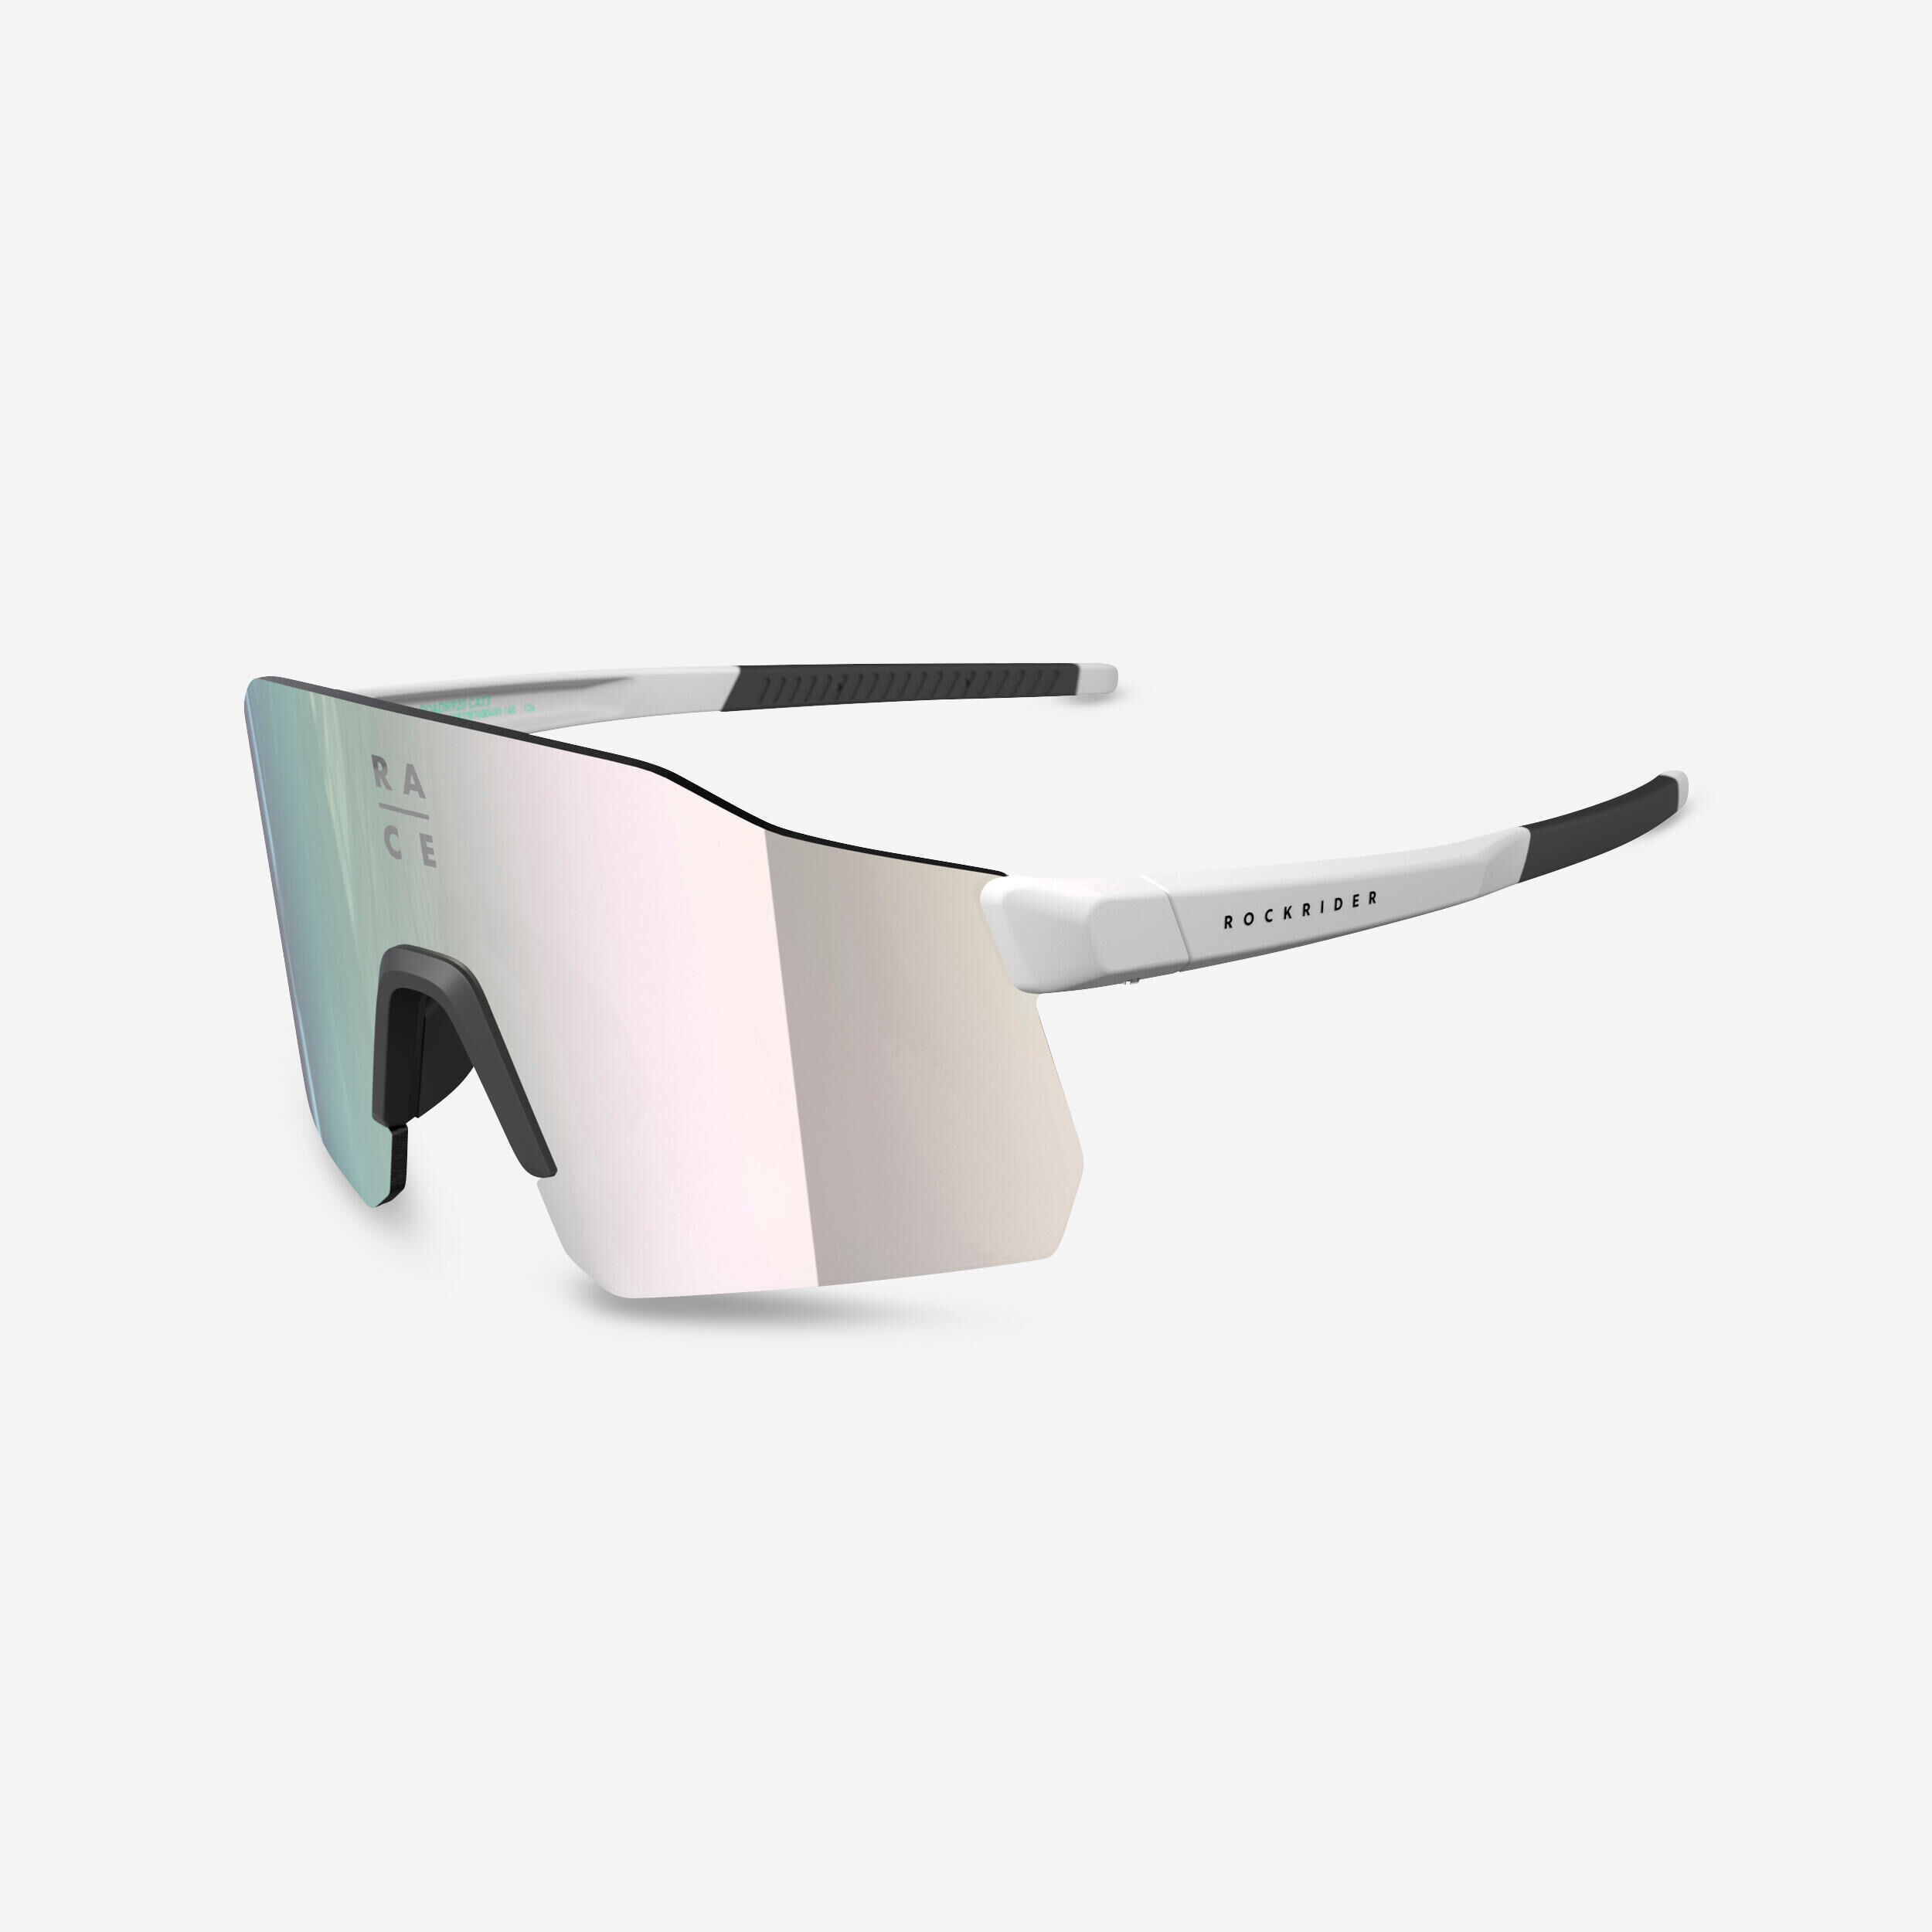 VAN RYSEL Adult Cycling Sunglasses RoadR 920 Category 3 High-Definition - White